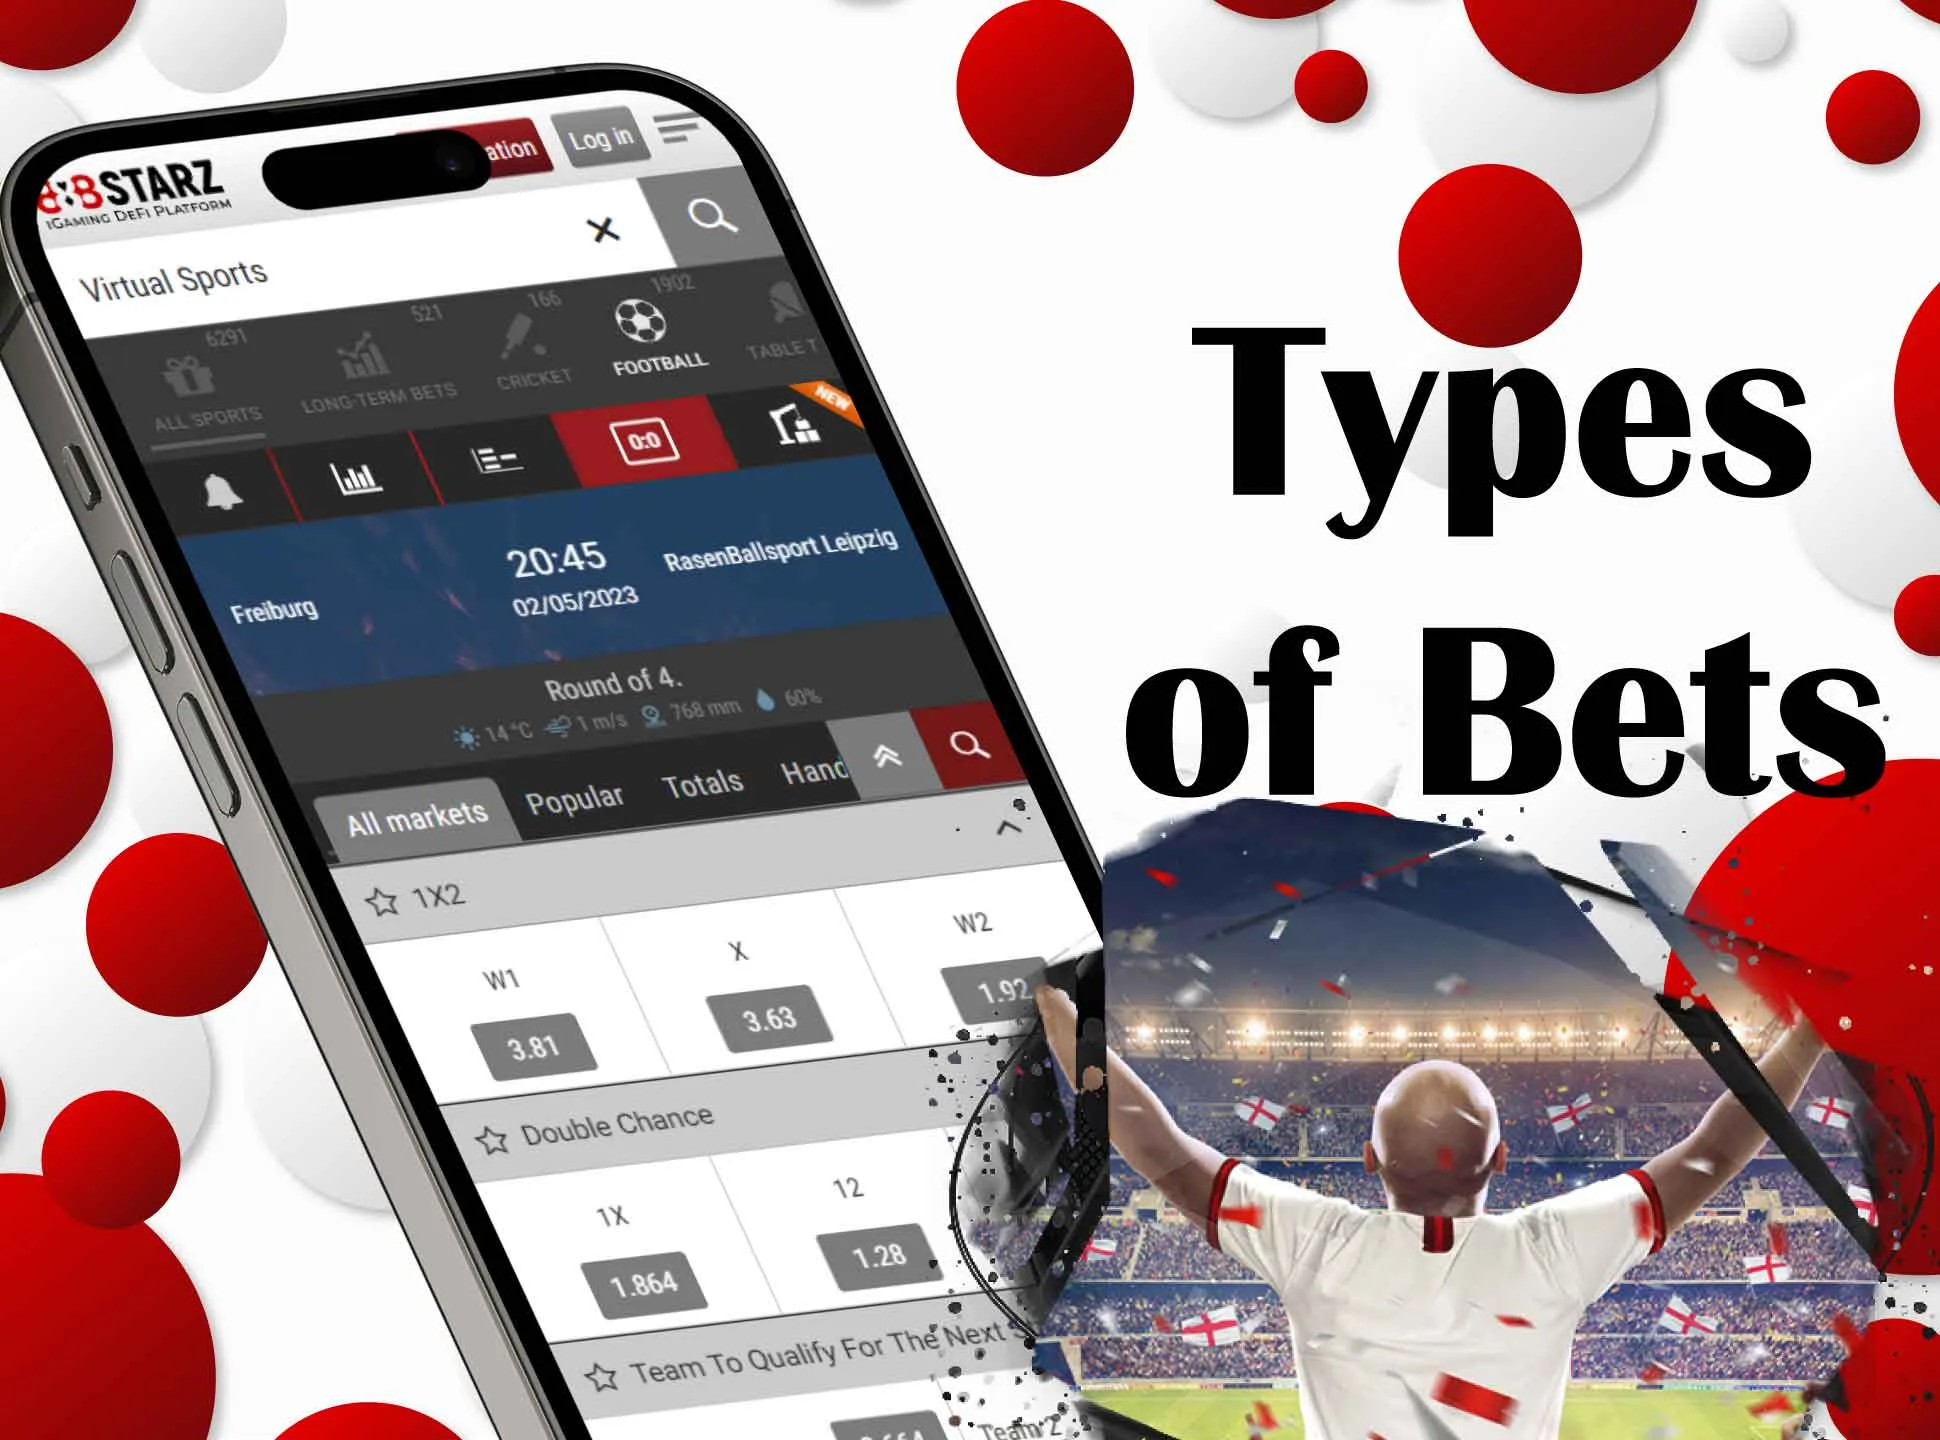 There are different types of bets in the 888starz app.